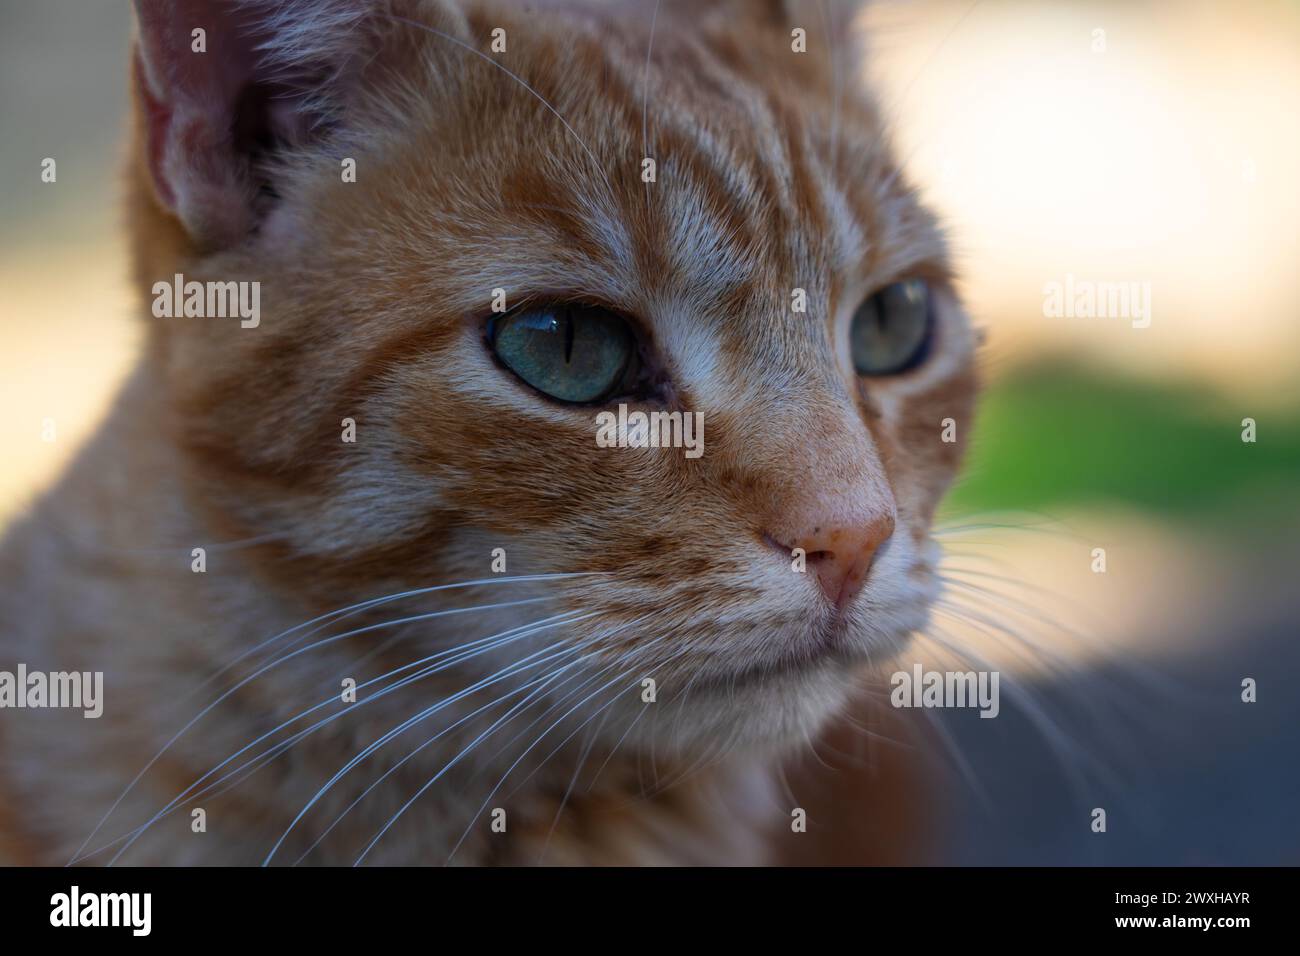 Close-up of a tabby cat Stock Photo